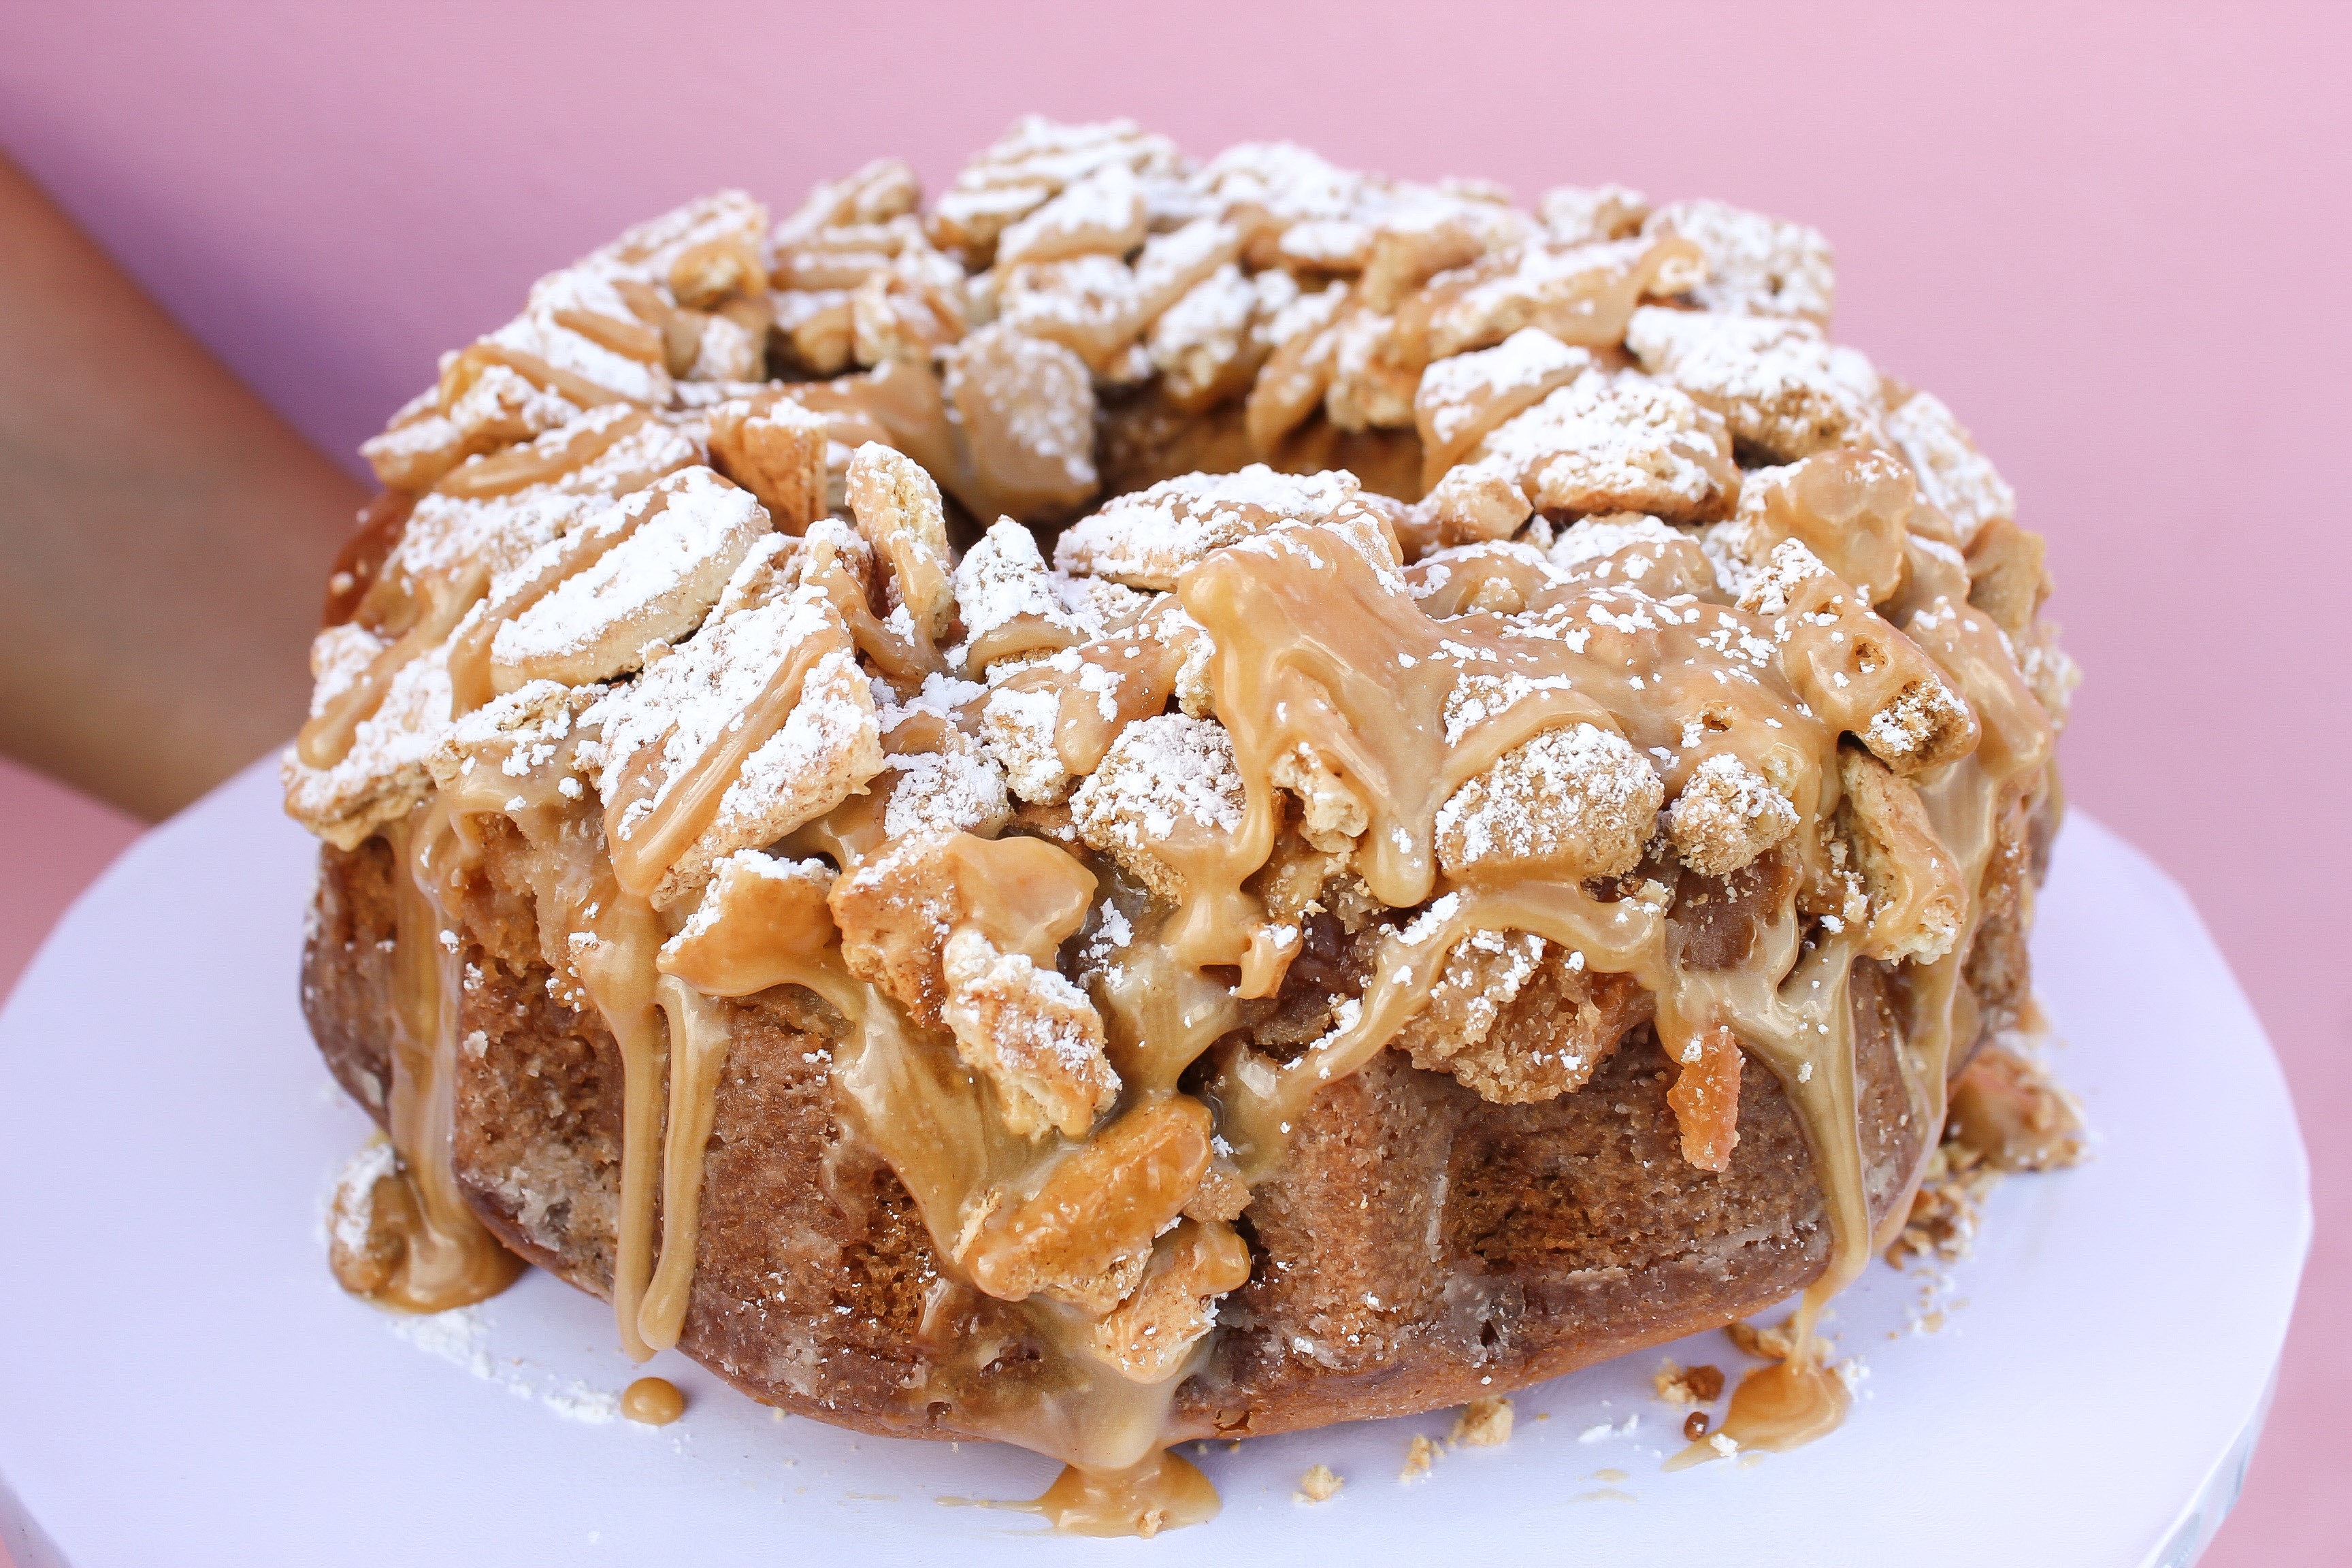 Bunnie Cakes Bakery and Café’s Sweet Apple kosher bundt cake just in time for the Jewish High Holidays. Free local delivery in Miami-Dade County when ordered by September 10th. 

Photo courtesy of Bunnie Cakes Bakery and Café in Downtown Doral
